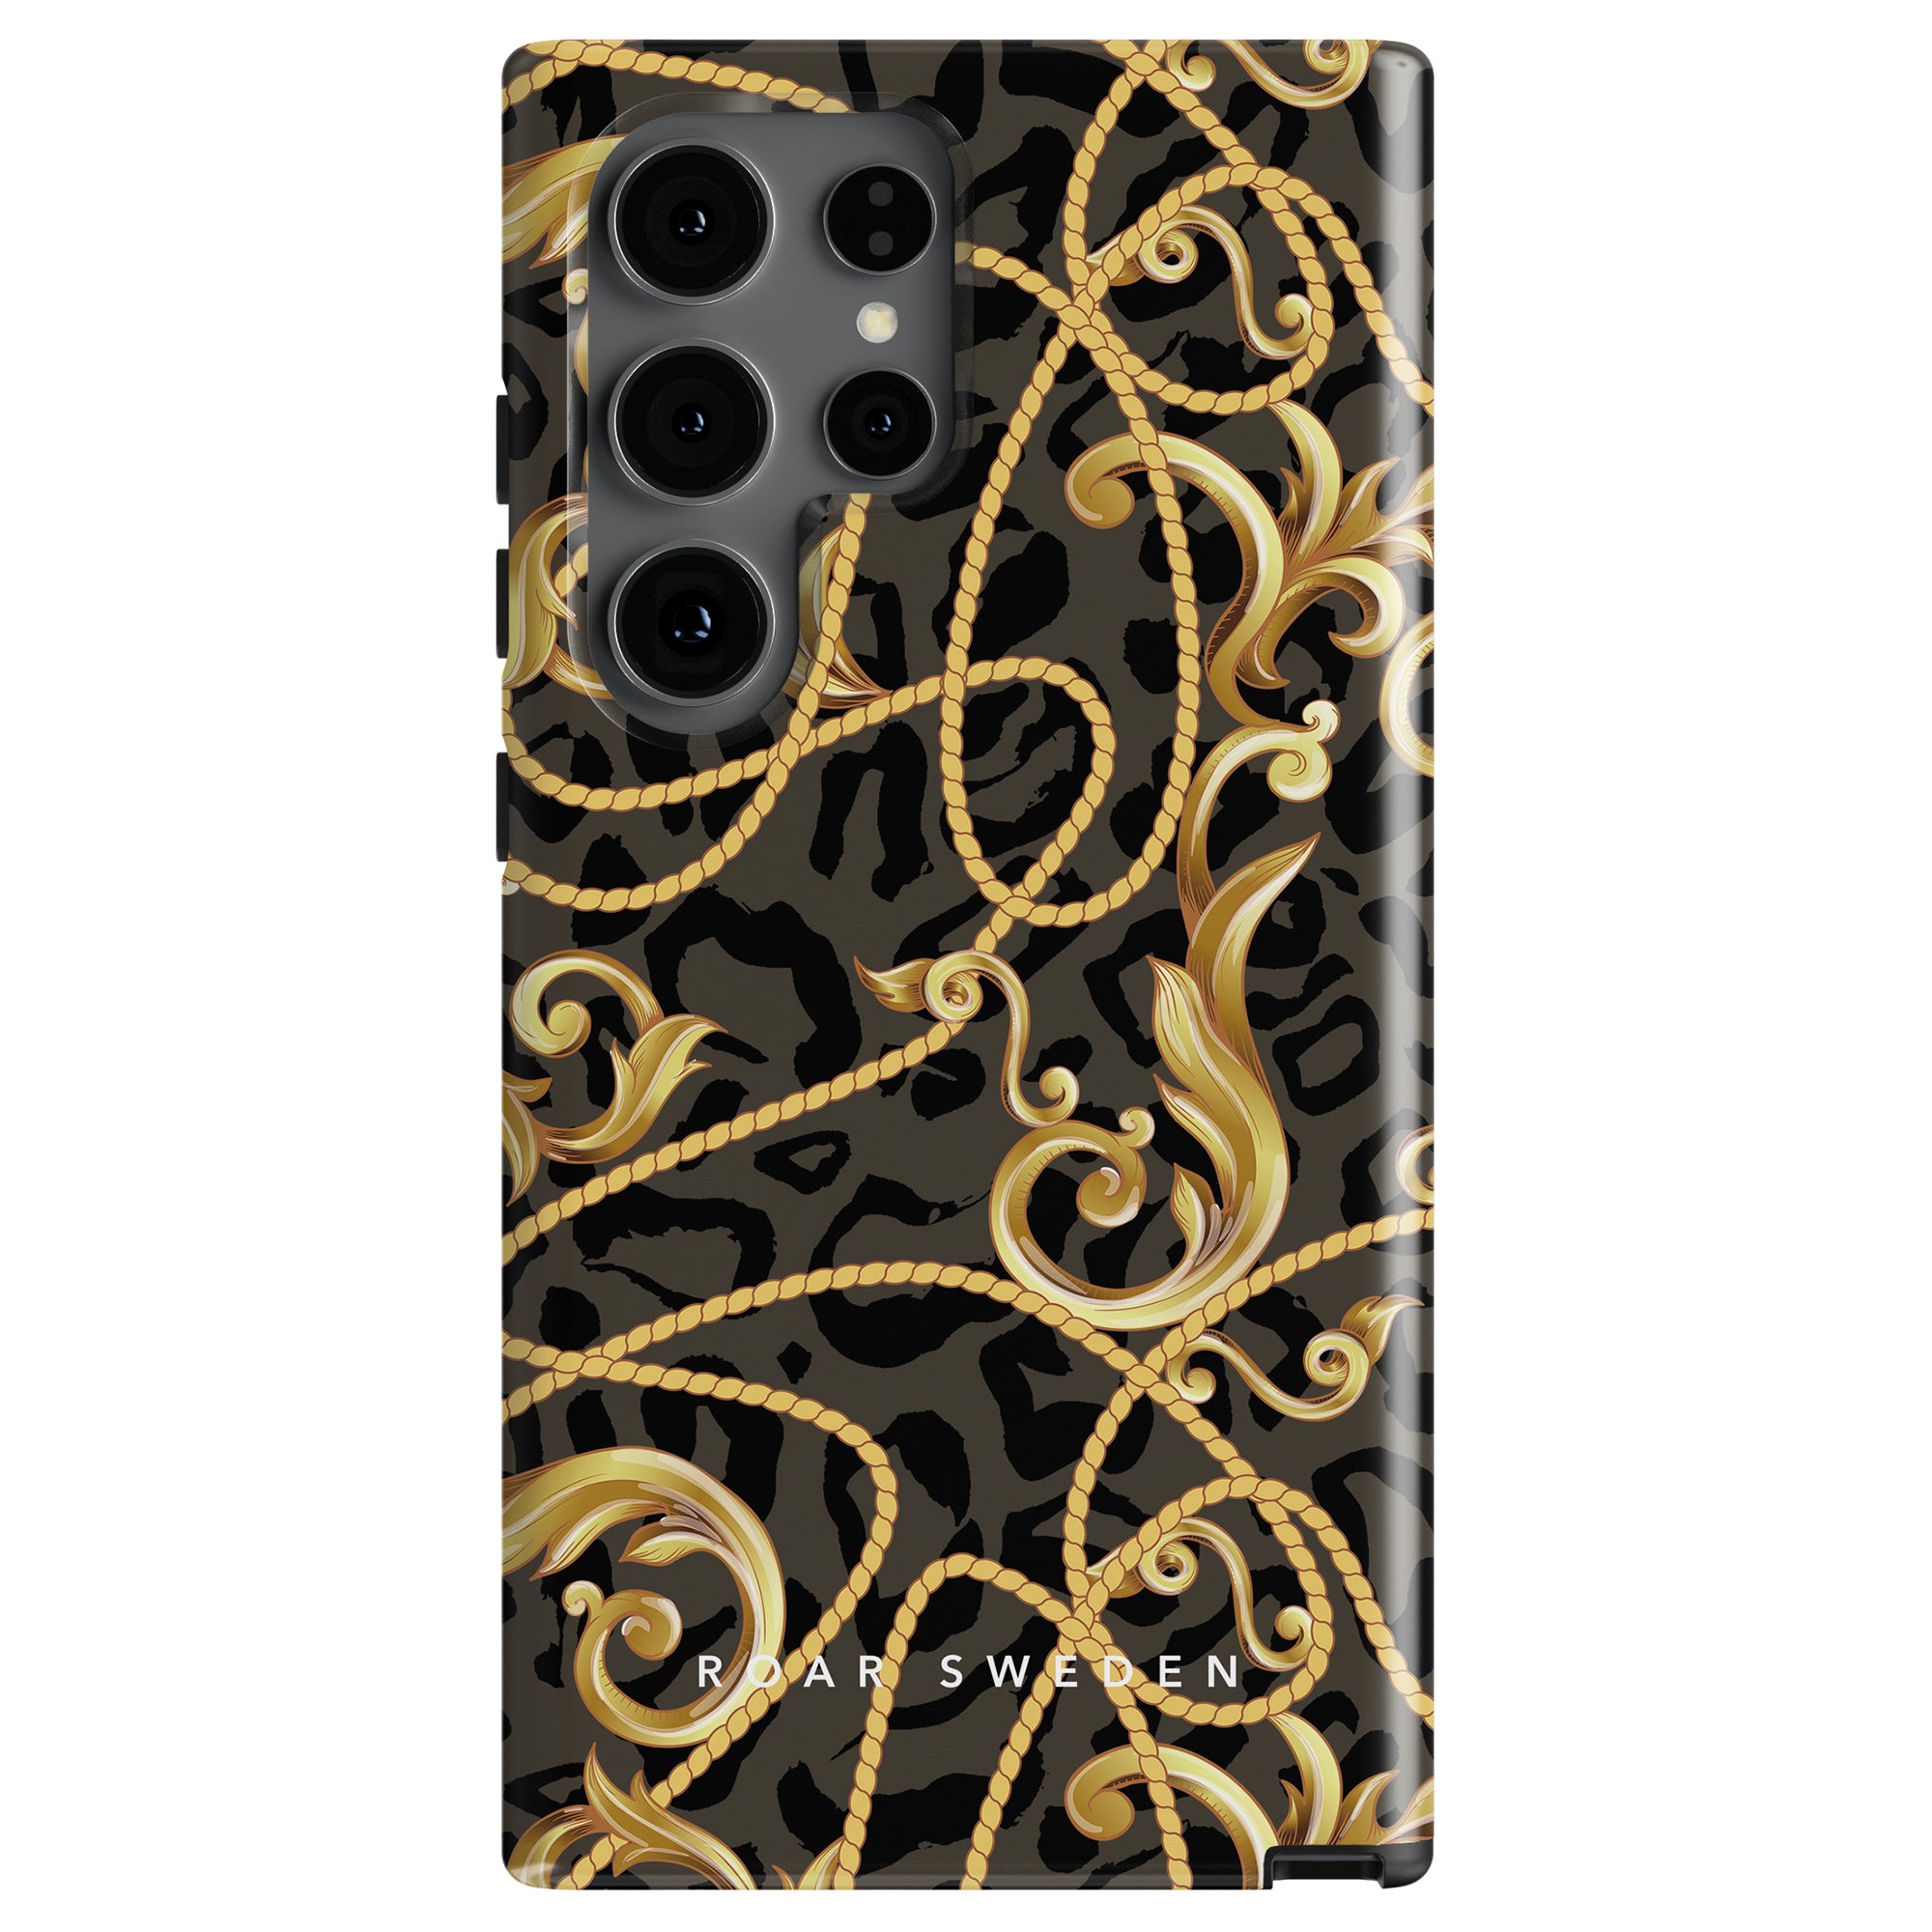 A Baroque - Tough Case with a black and gold ornate patterned case featuring lyxiga gyllene snirkelmönster, swirls, chains, and an animal print background by "Roar Sweden.